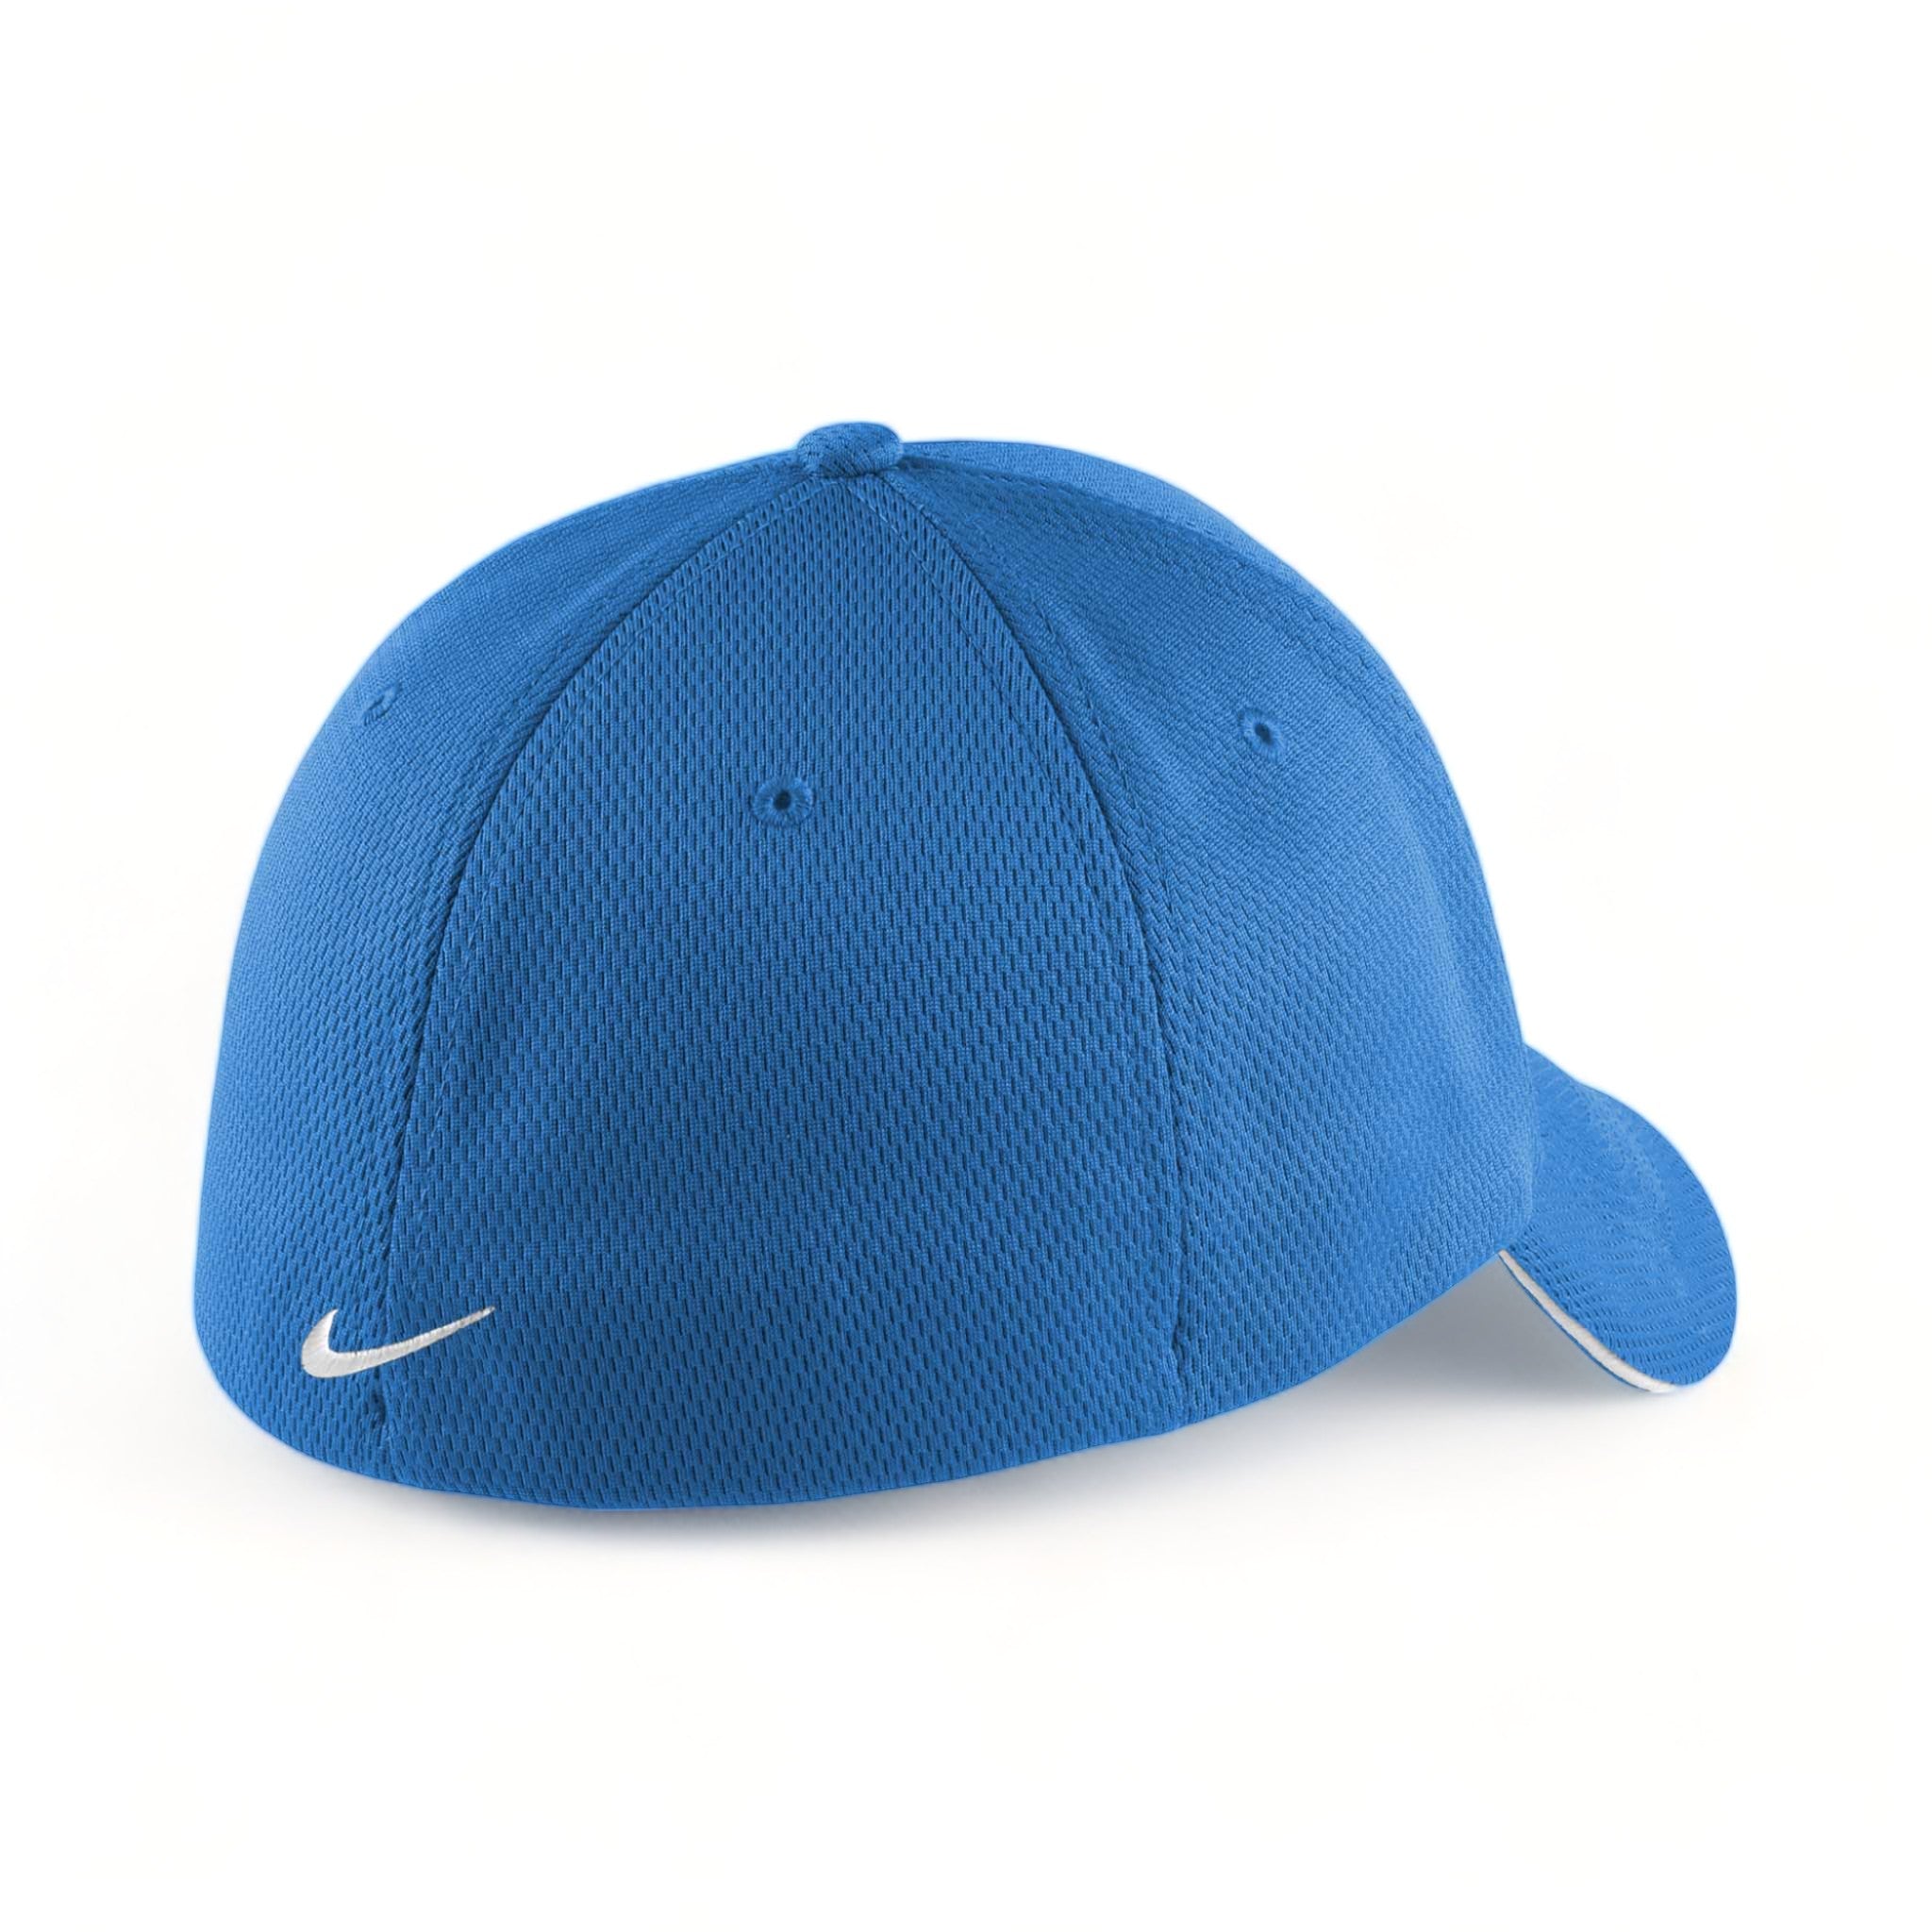 Back view of Nike NKFD9718 custom hat in game royal and white